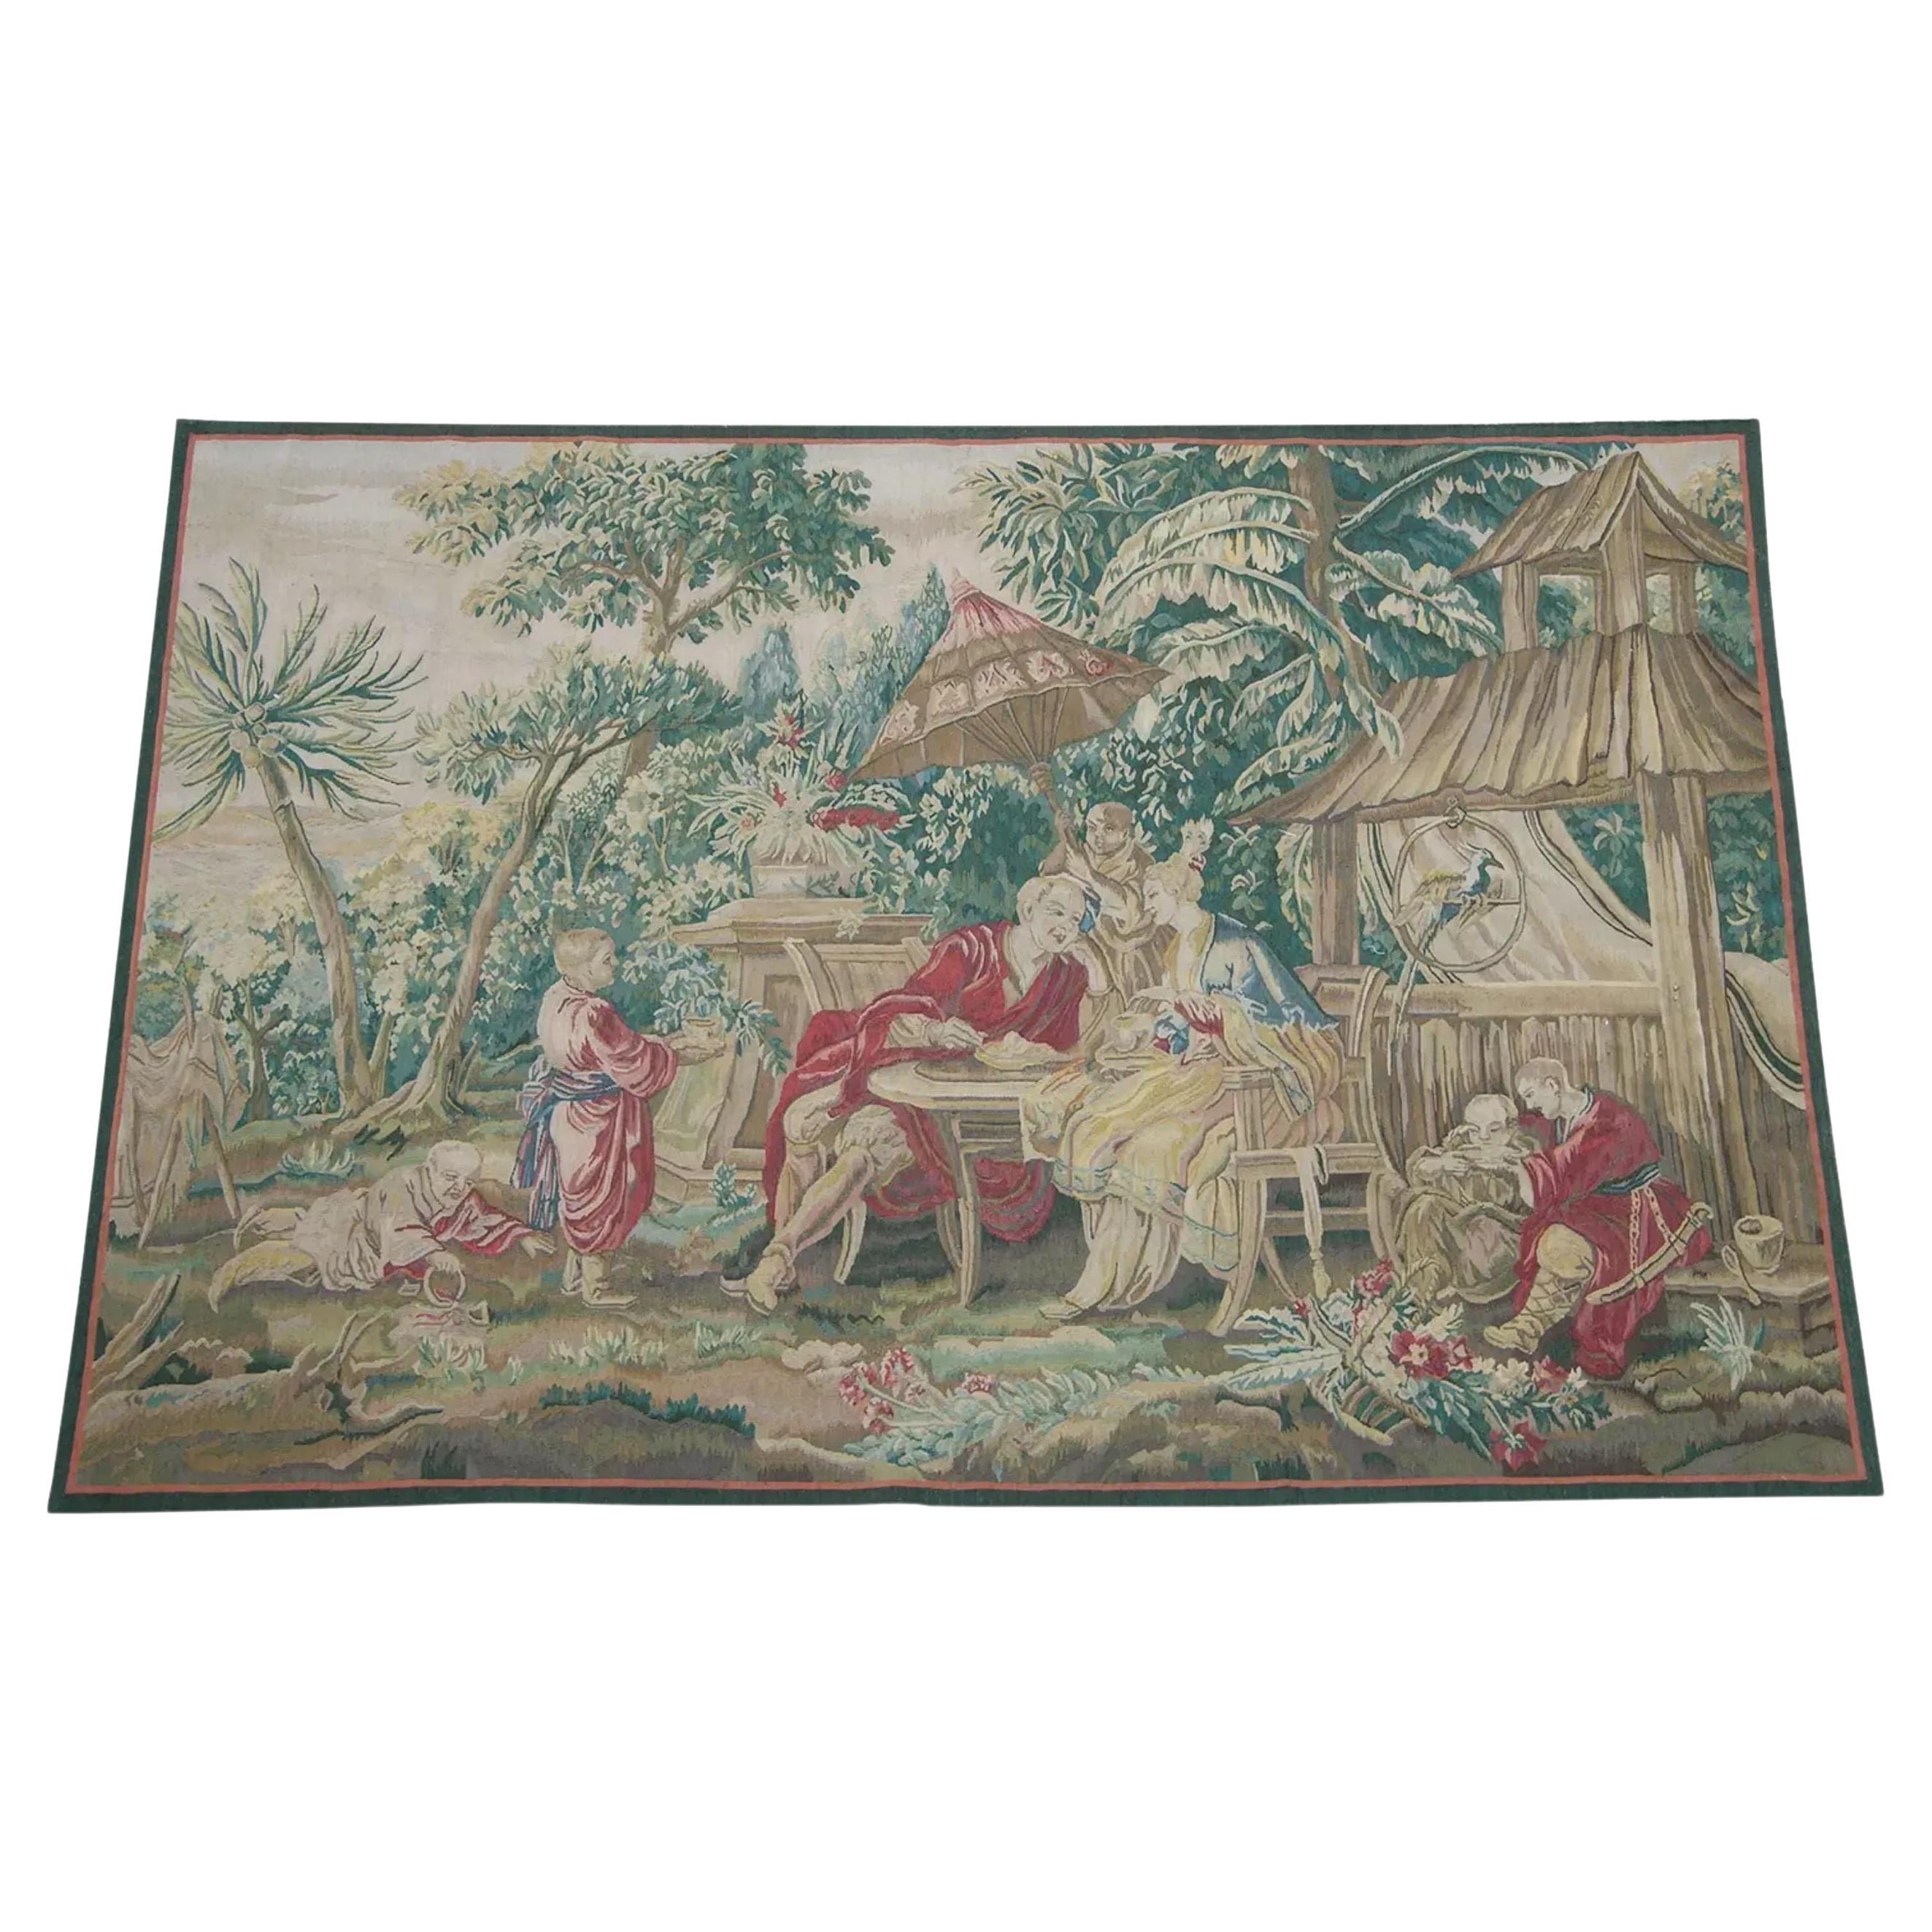 Vintage Tapestry Depicting Royalty 7.2X5.4 For Sale